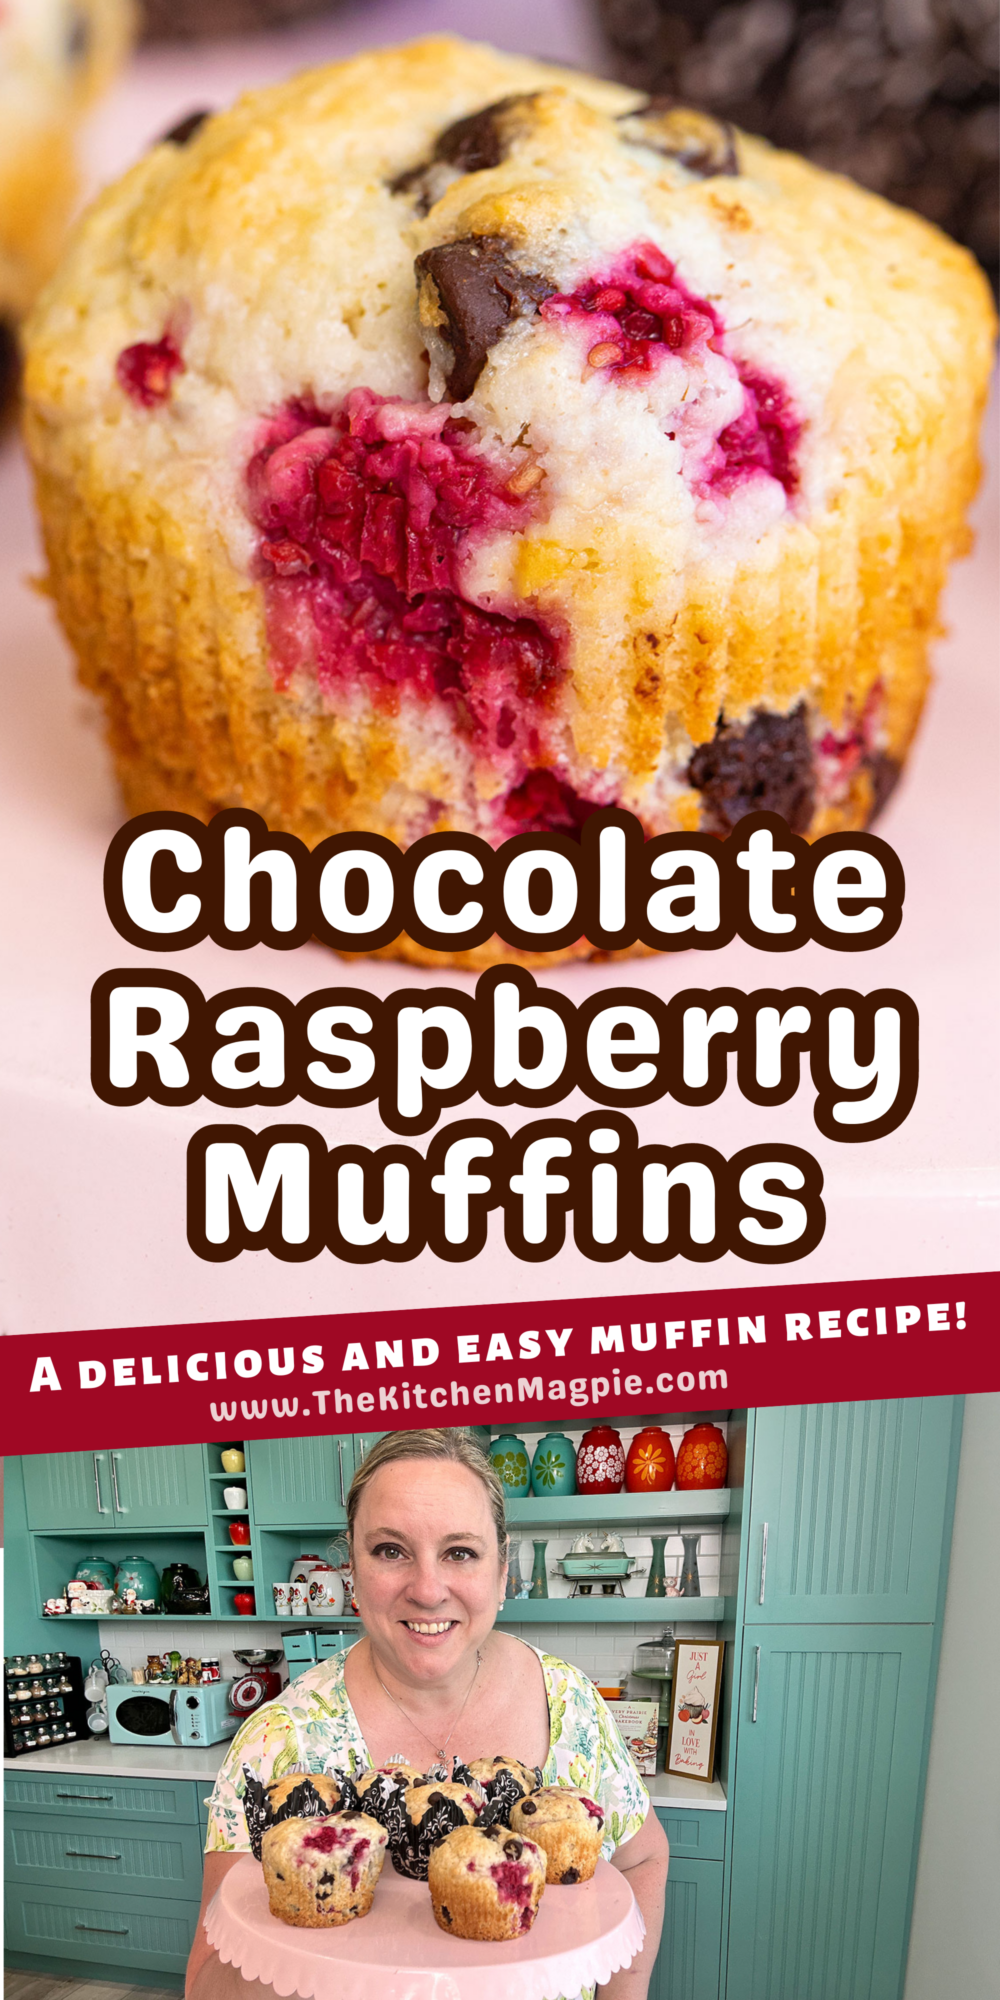 These decadent chocolate and raspberry muffins are the perfect flavor combination and make for a great breakfast or snack the whole family will love.